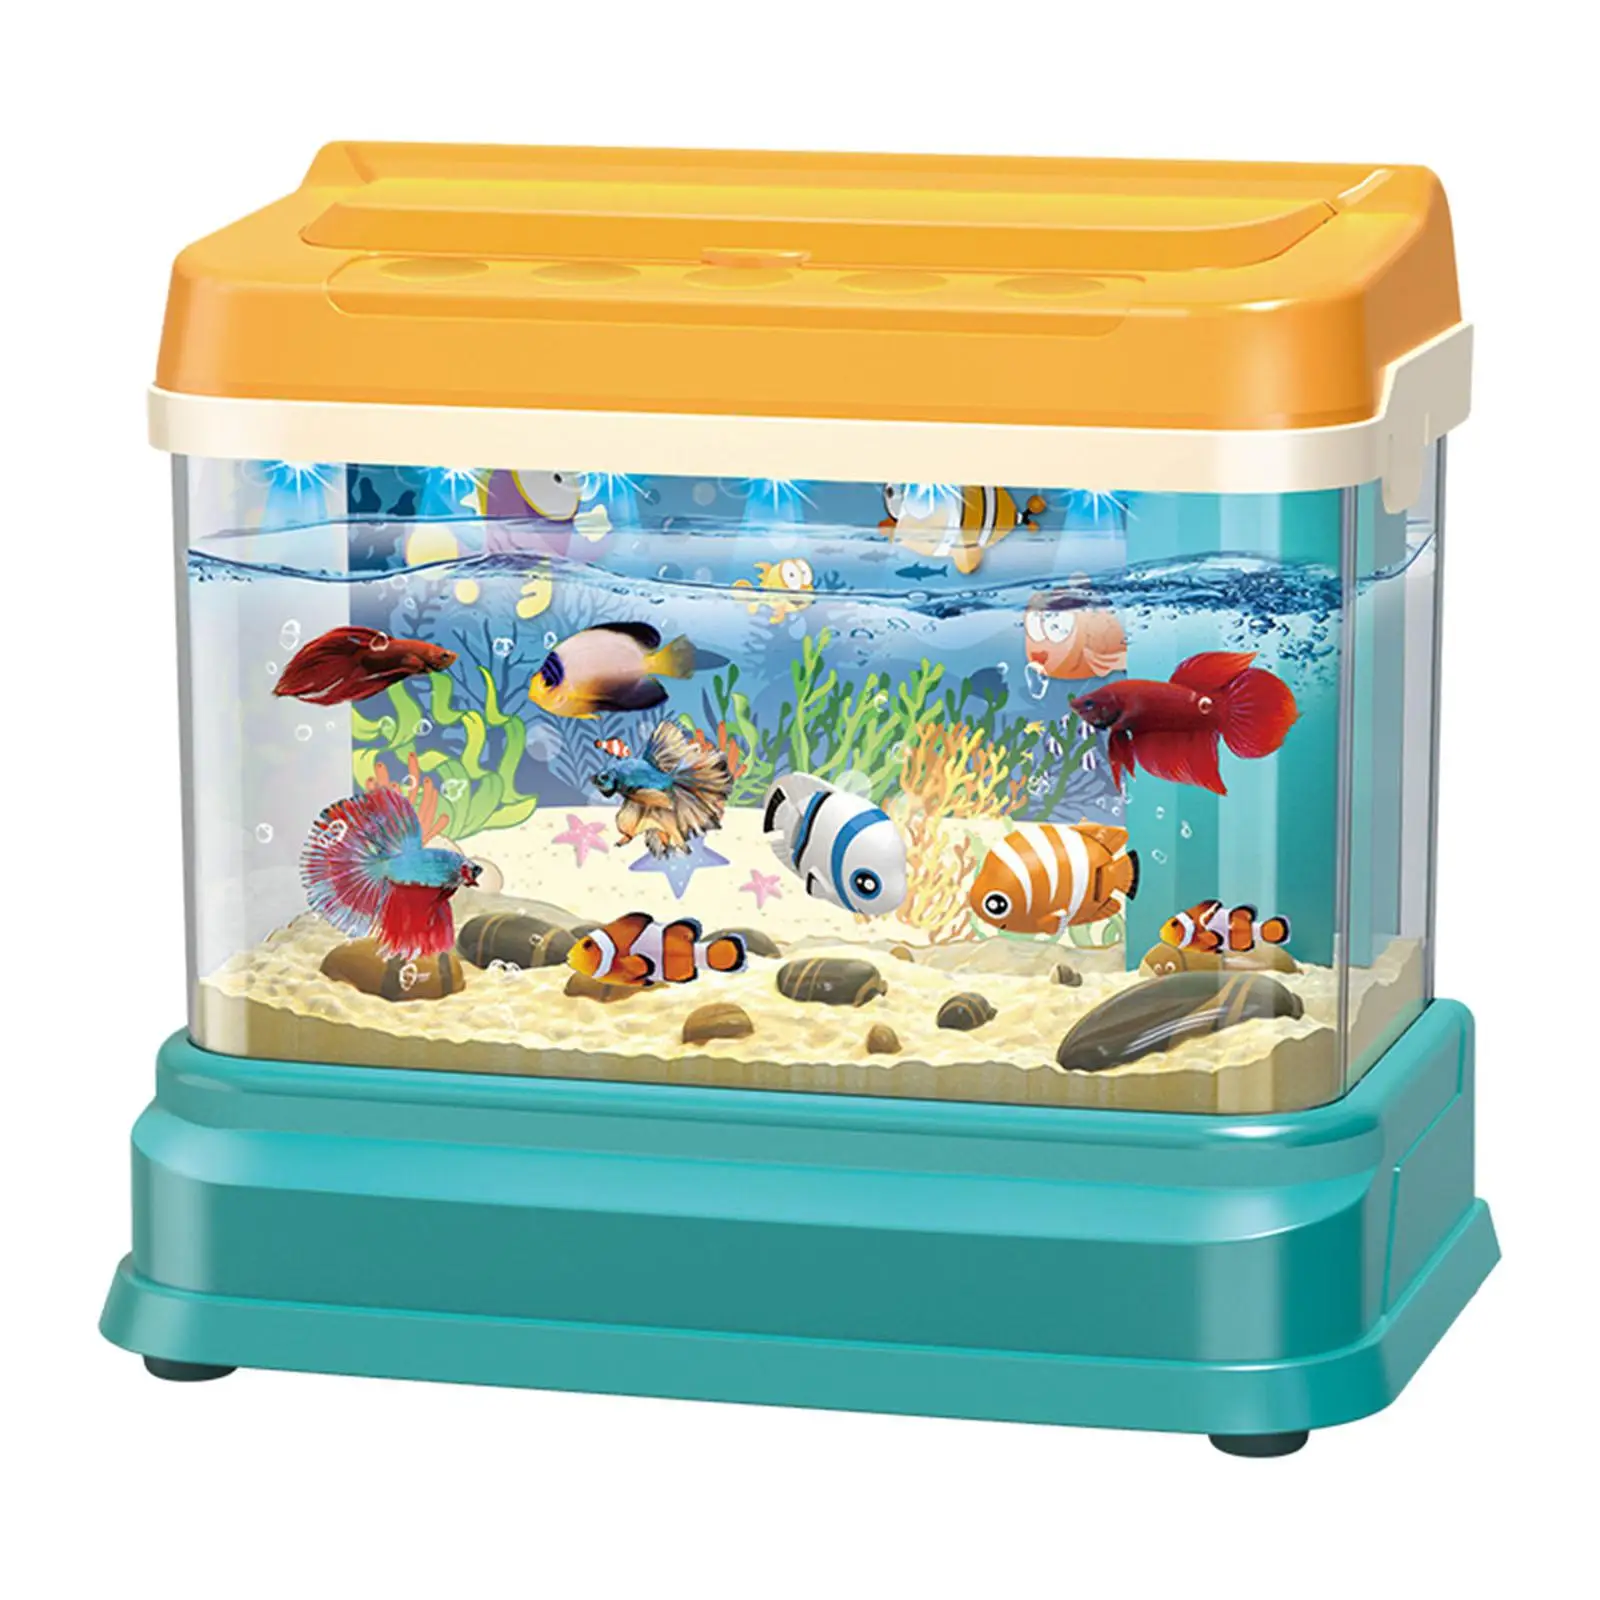 Simulation Electric Fish Tank Educational Toys with USB Light for Children